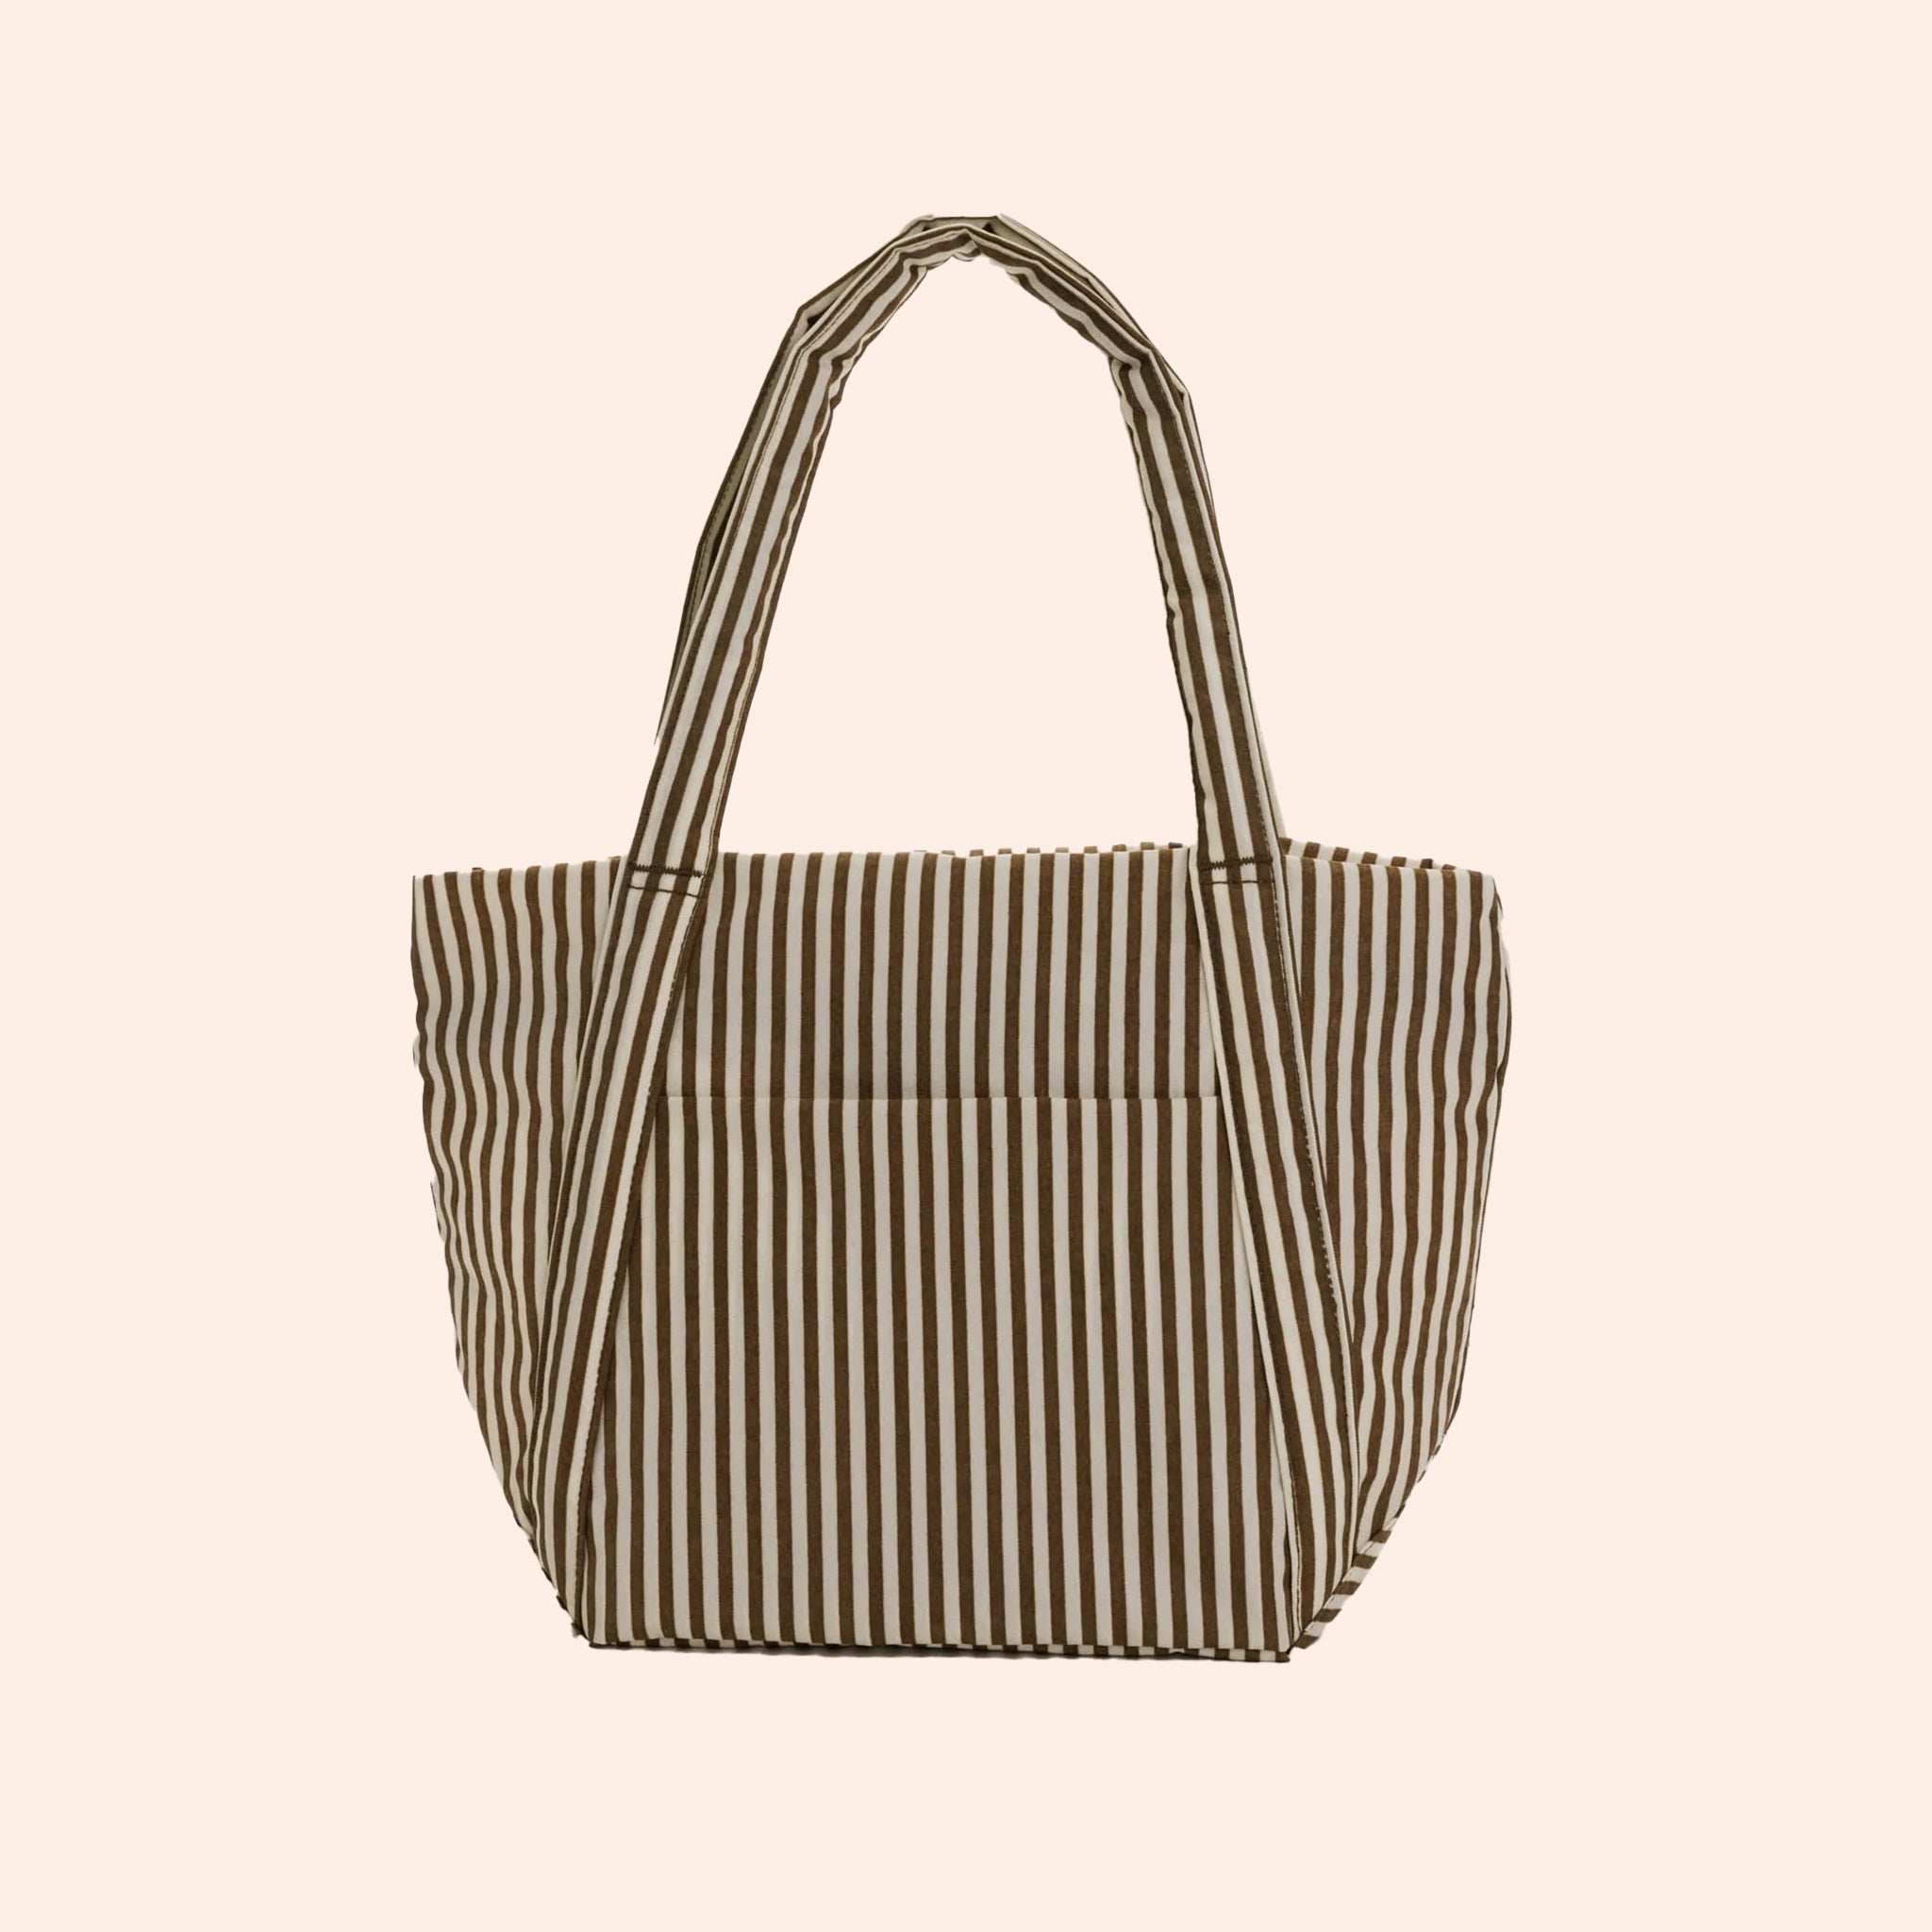 A brown and white stripe nylon tote bag with shoulder handles and a front pocket. 